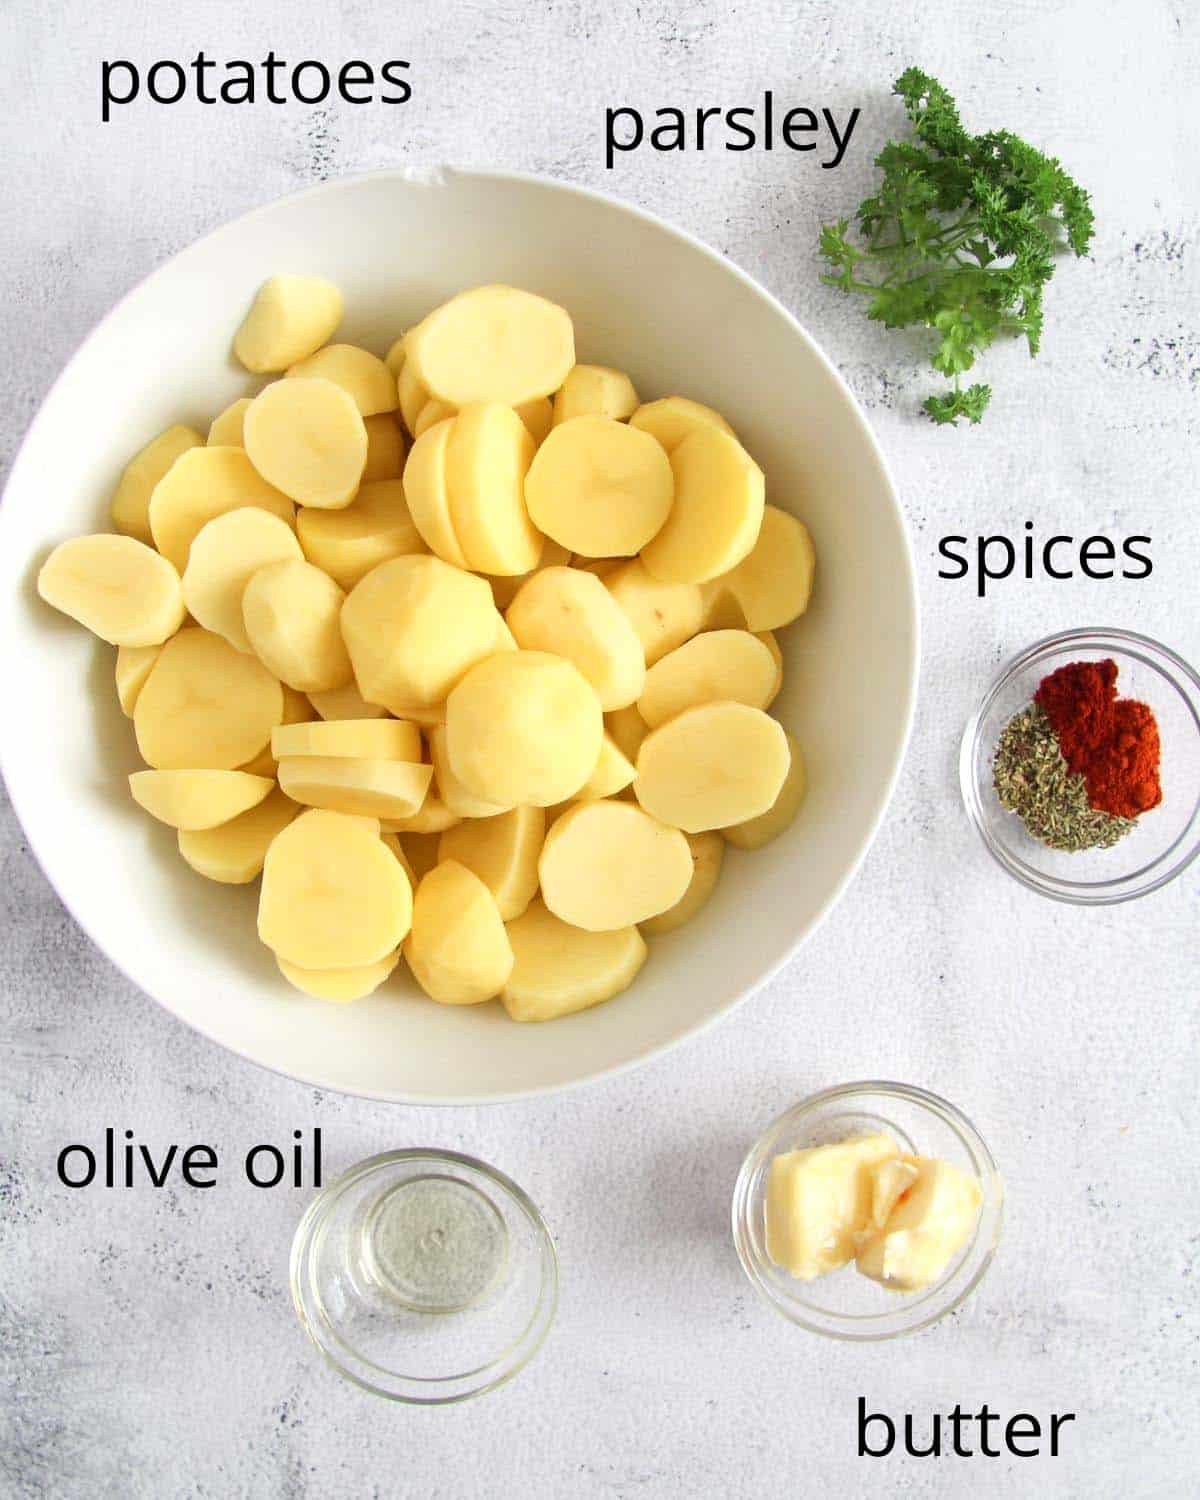 sliced potatoes in a large bowl, fresh parsley, oil, butter and spices in small bowls.